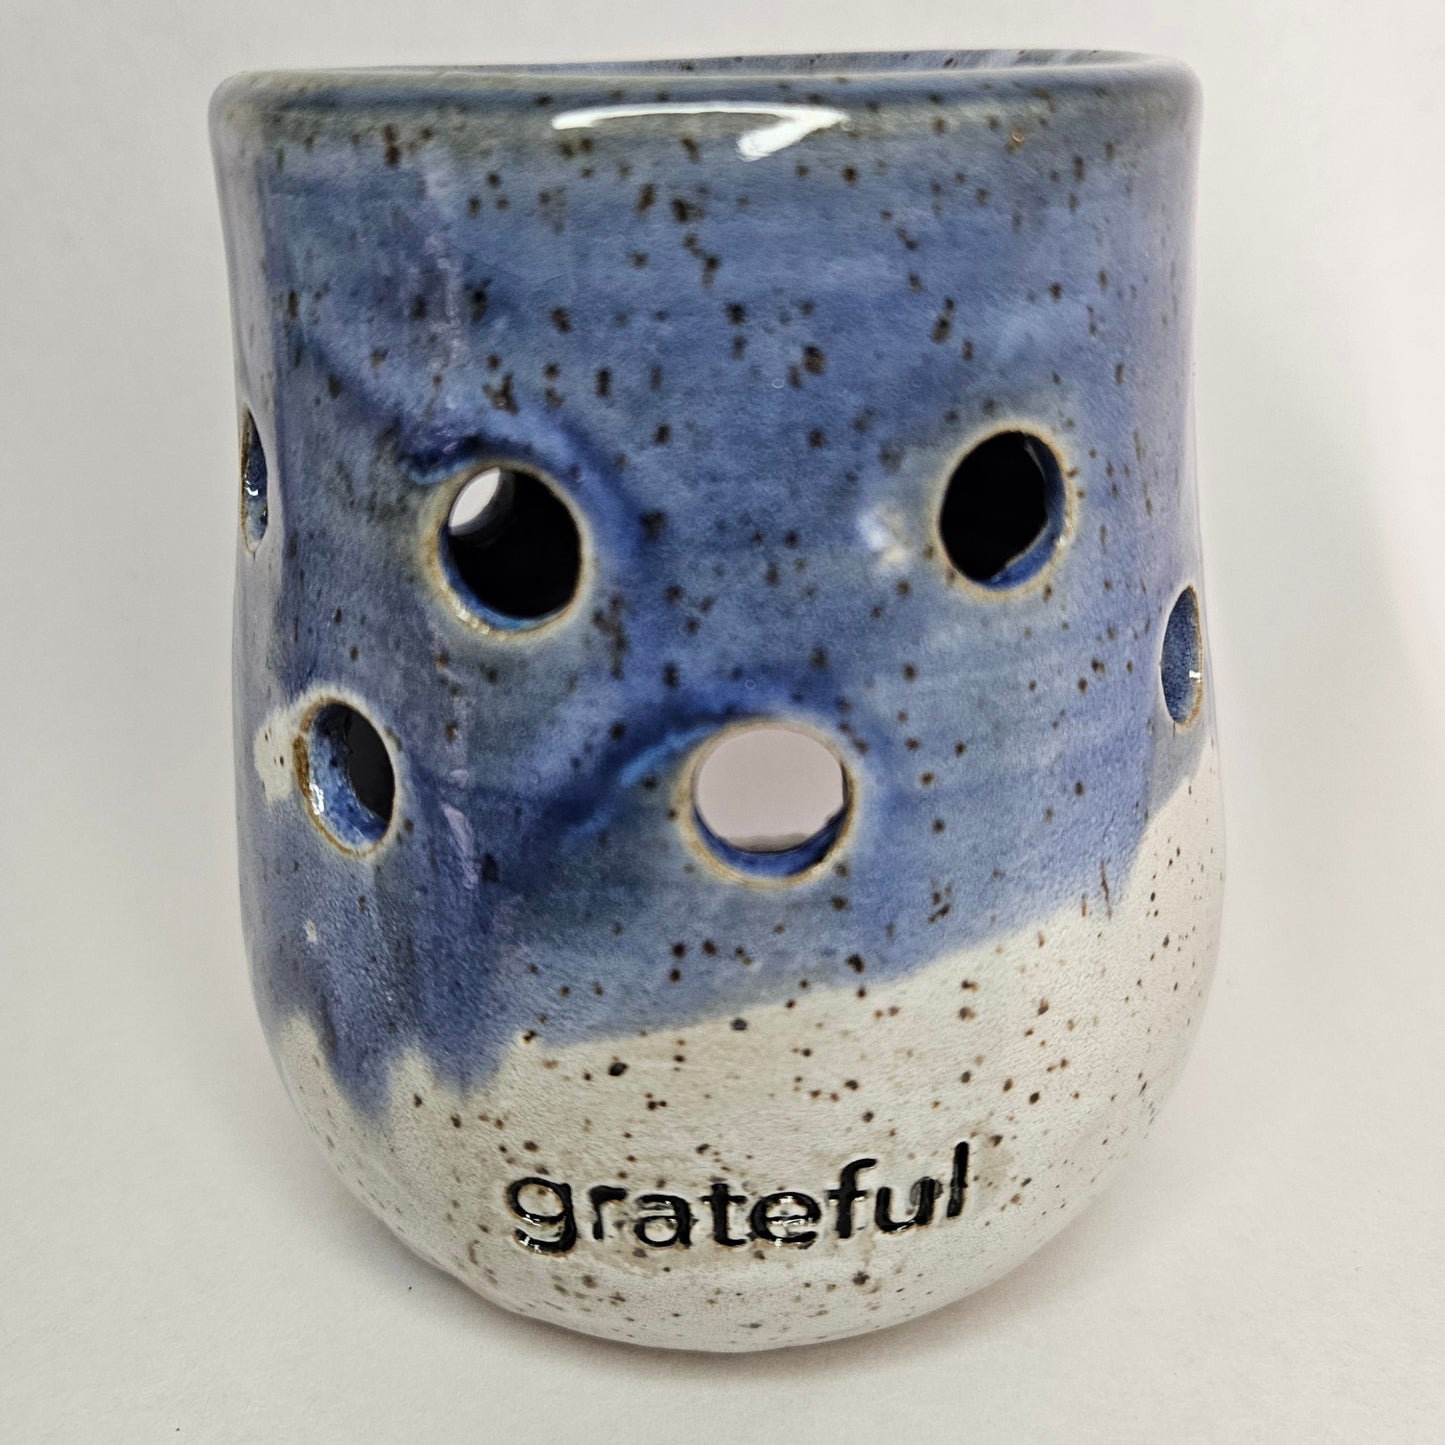 Wax melter - grateful - White and Blue